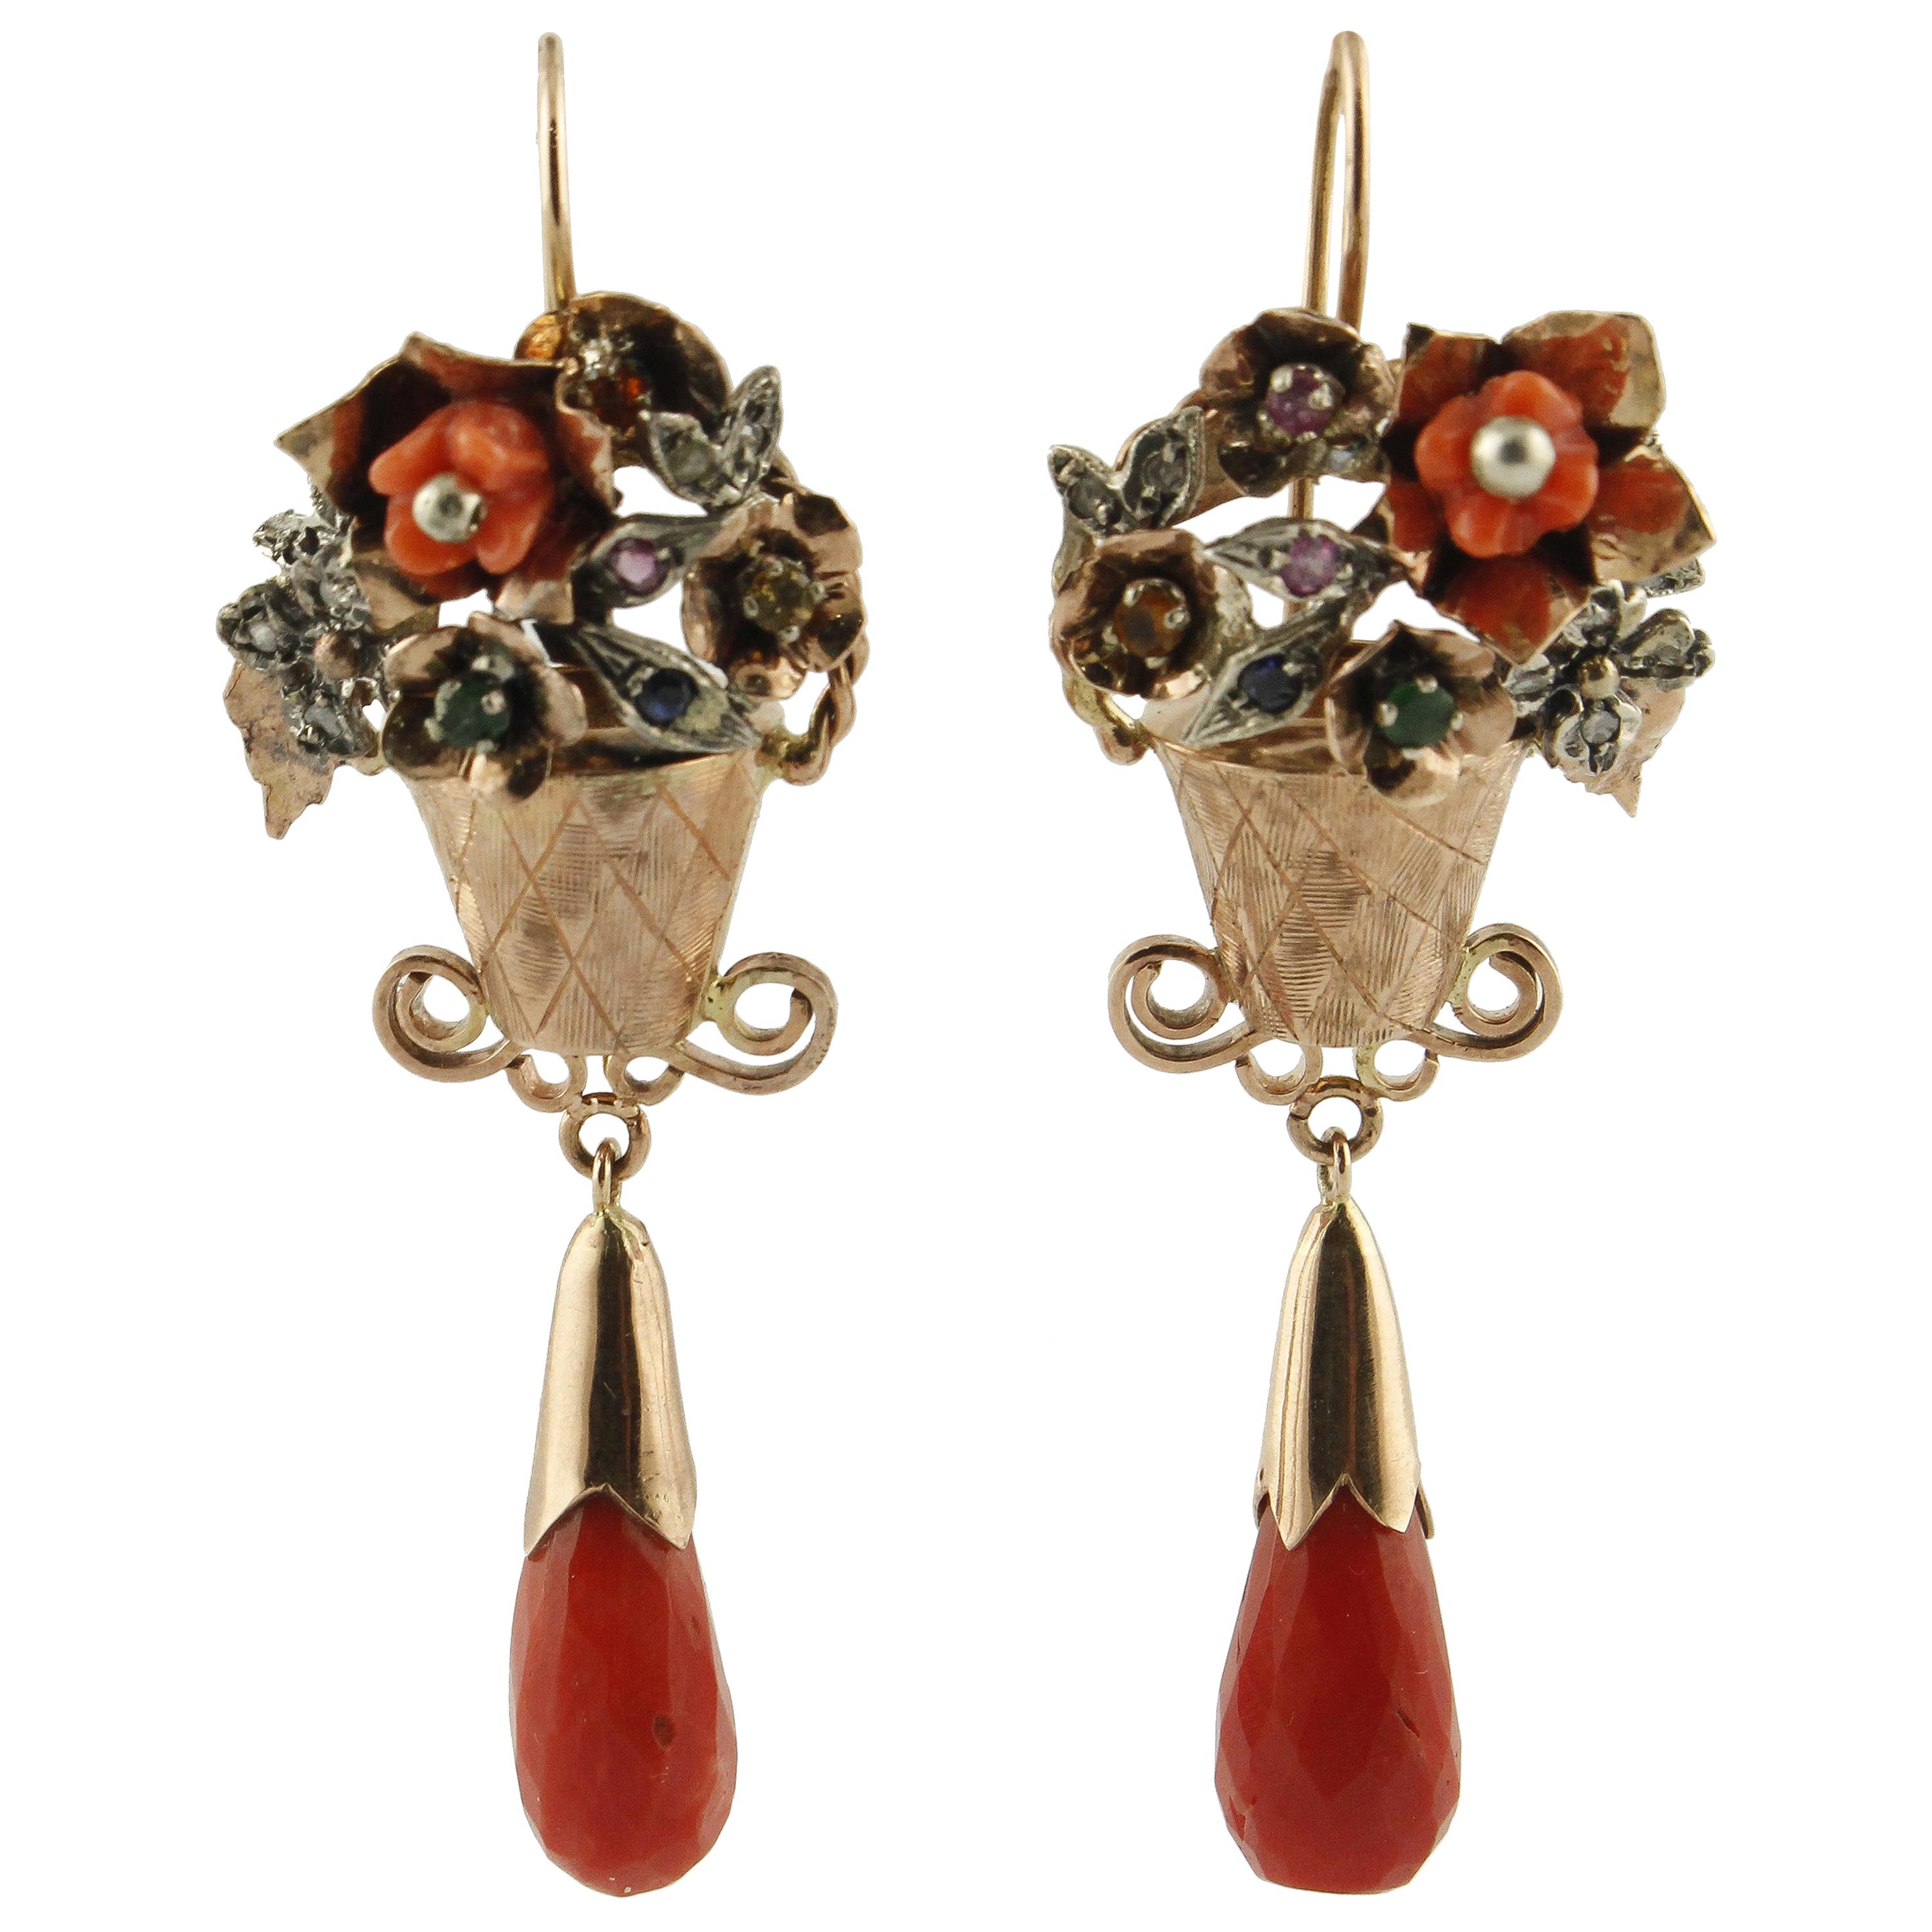 Diamonds, Emeralds, Red Coral, Sapphires, Rubies, Rose Gold and Silver Earrings